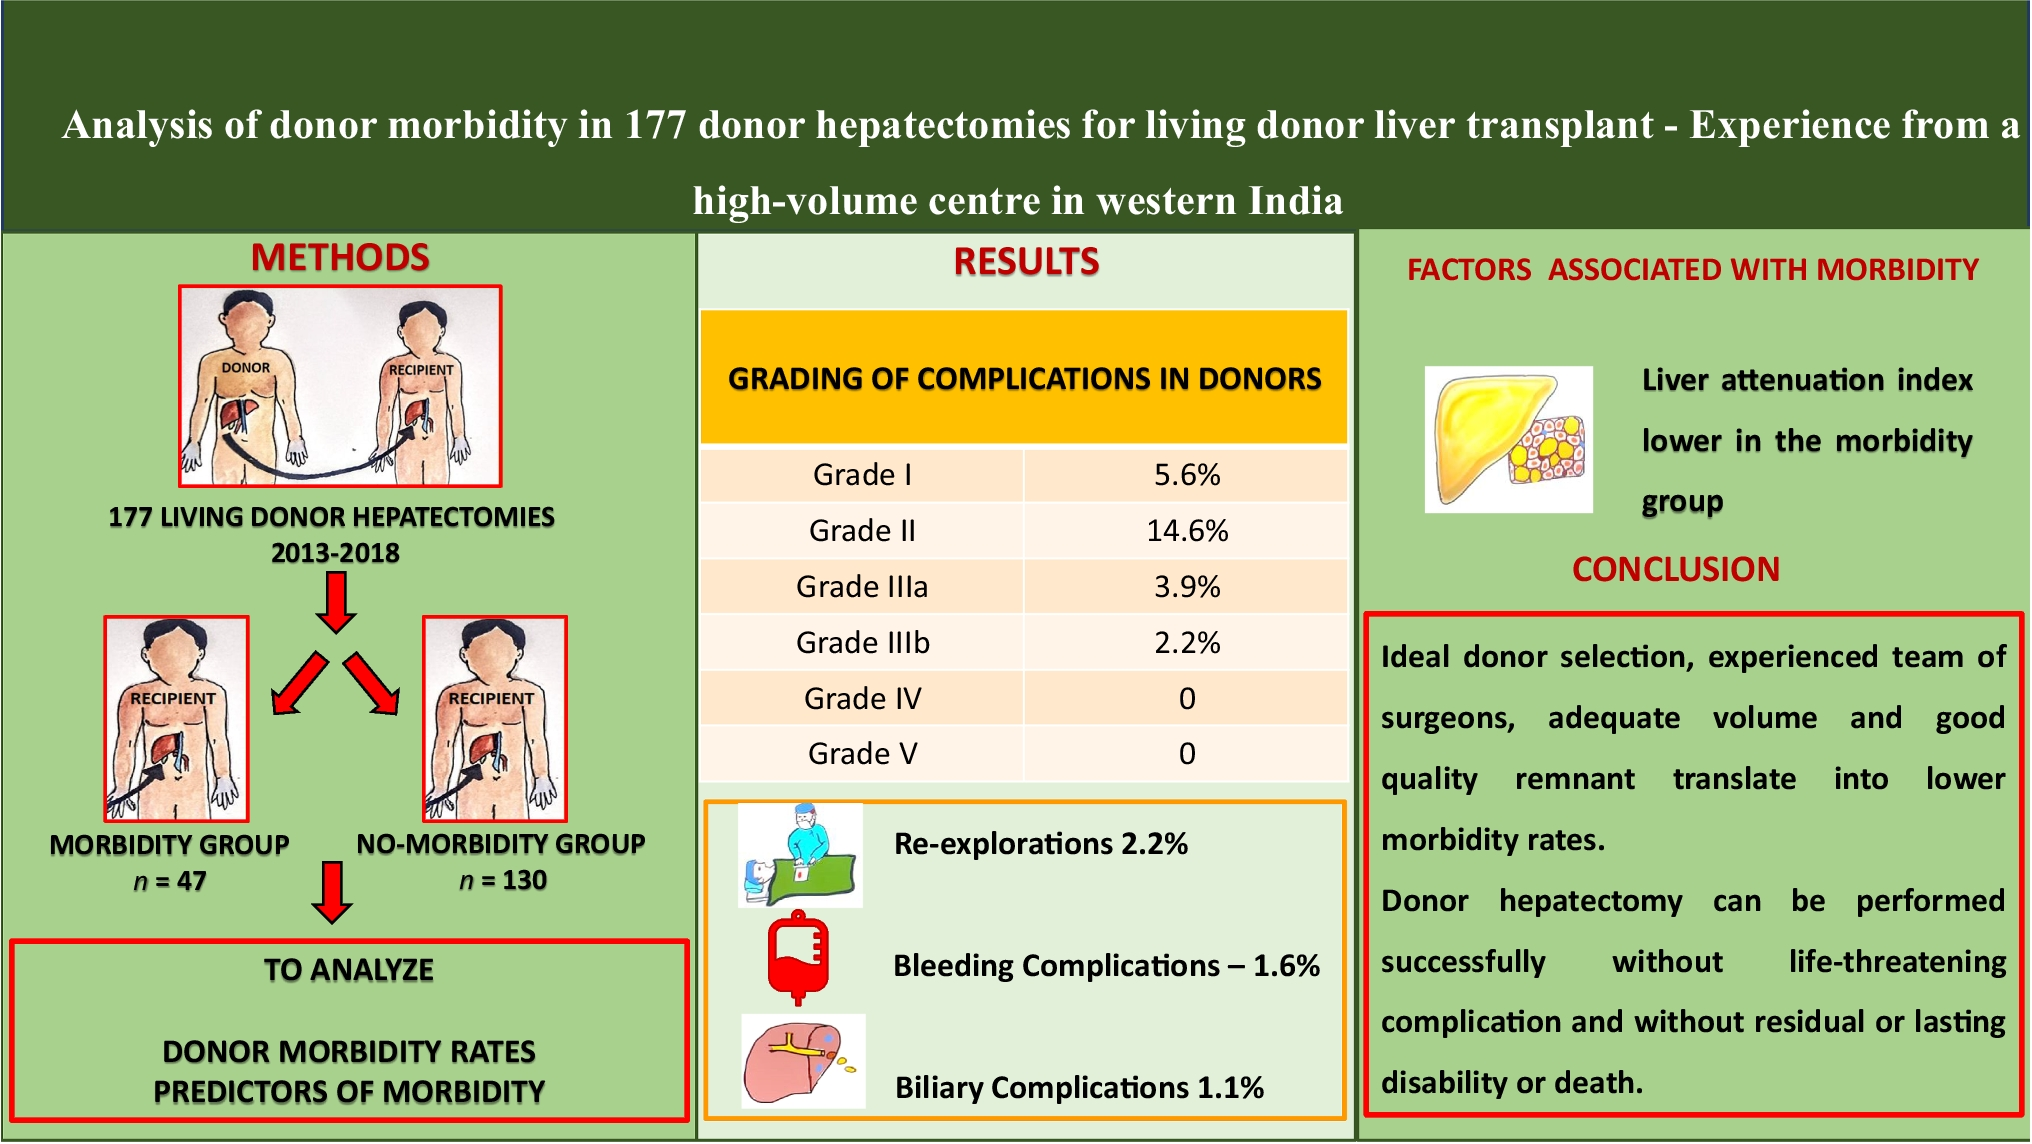 Analysis of donor morbidity in 177 donor hepatectomies for living donor liver transplant: Experience from a high-volume centre in western India